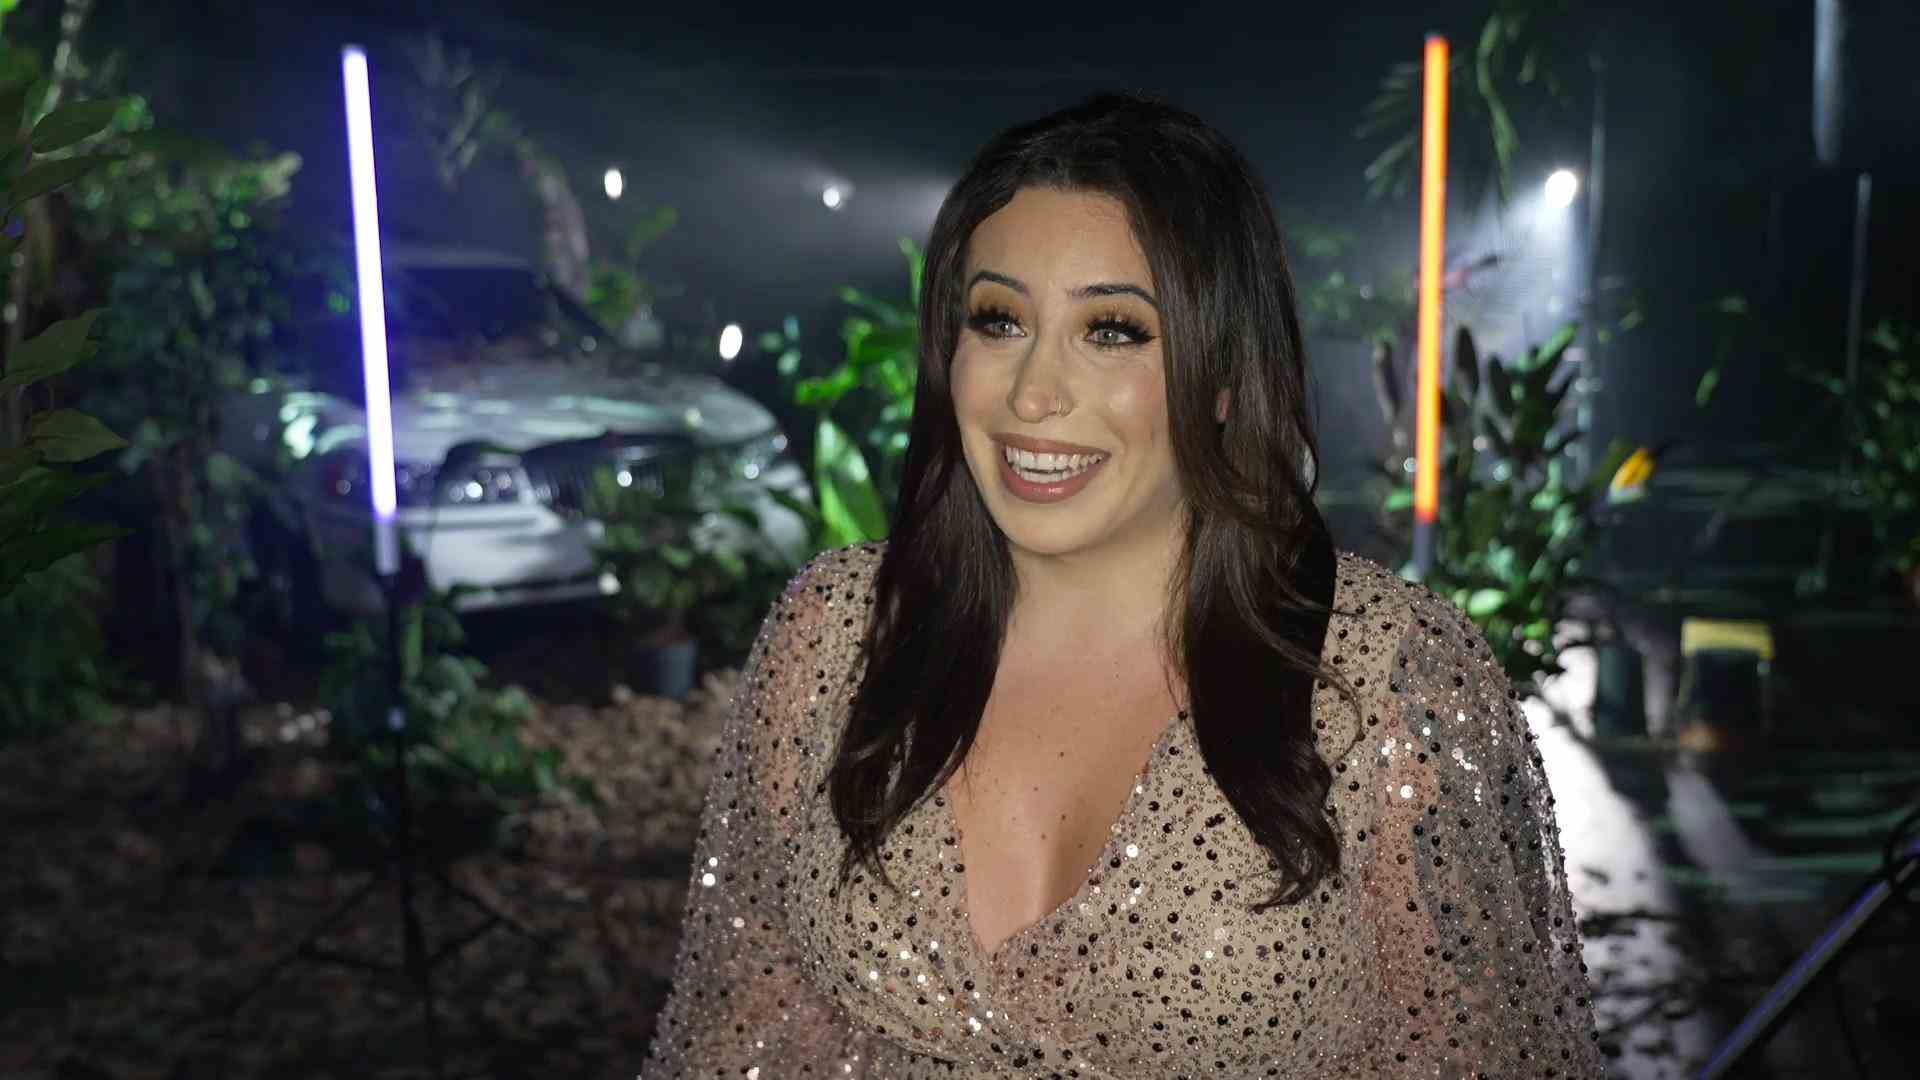 Jolina Mennen wants to encourage jungle candidate 2023 with her jungle appearance